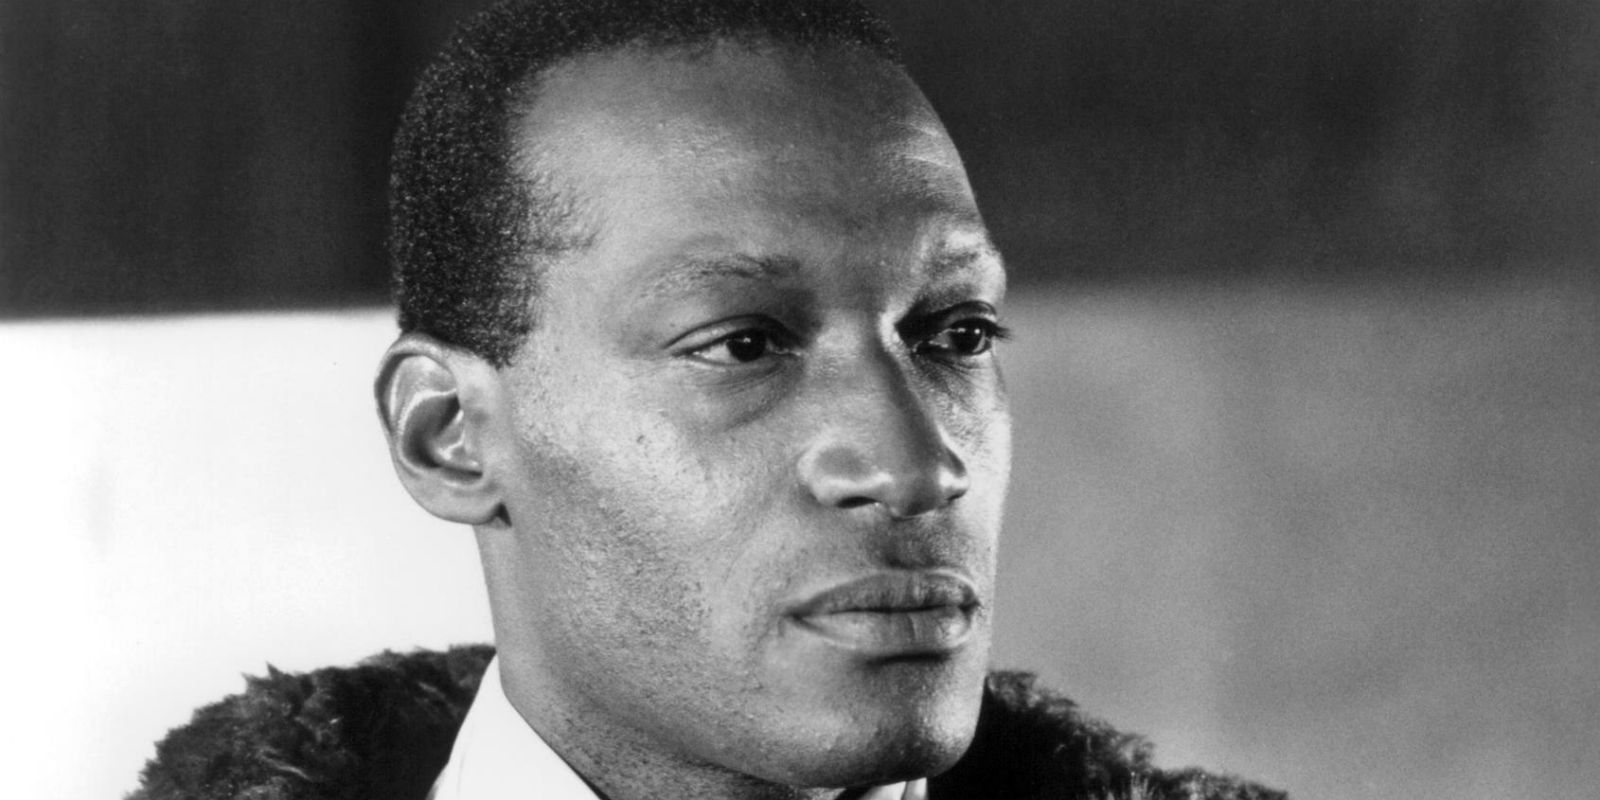 Tony Todd as Candyman - Black and White